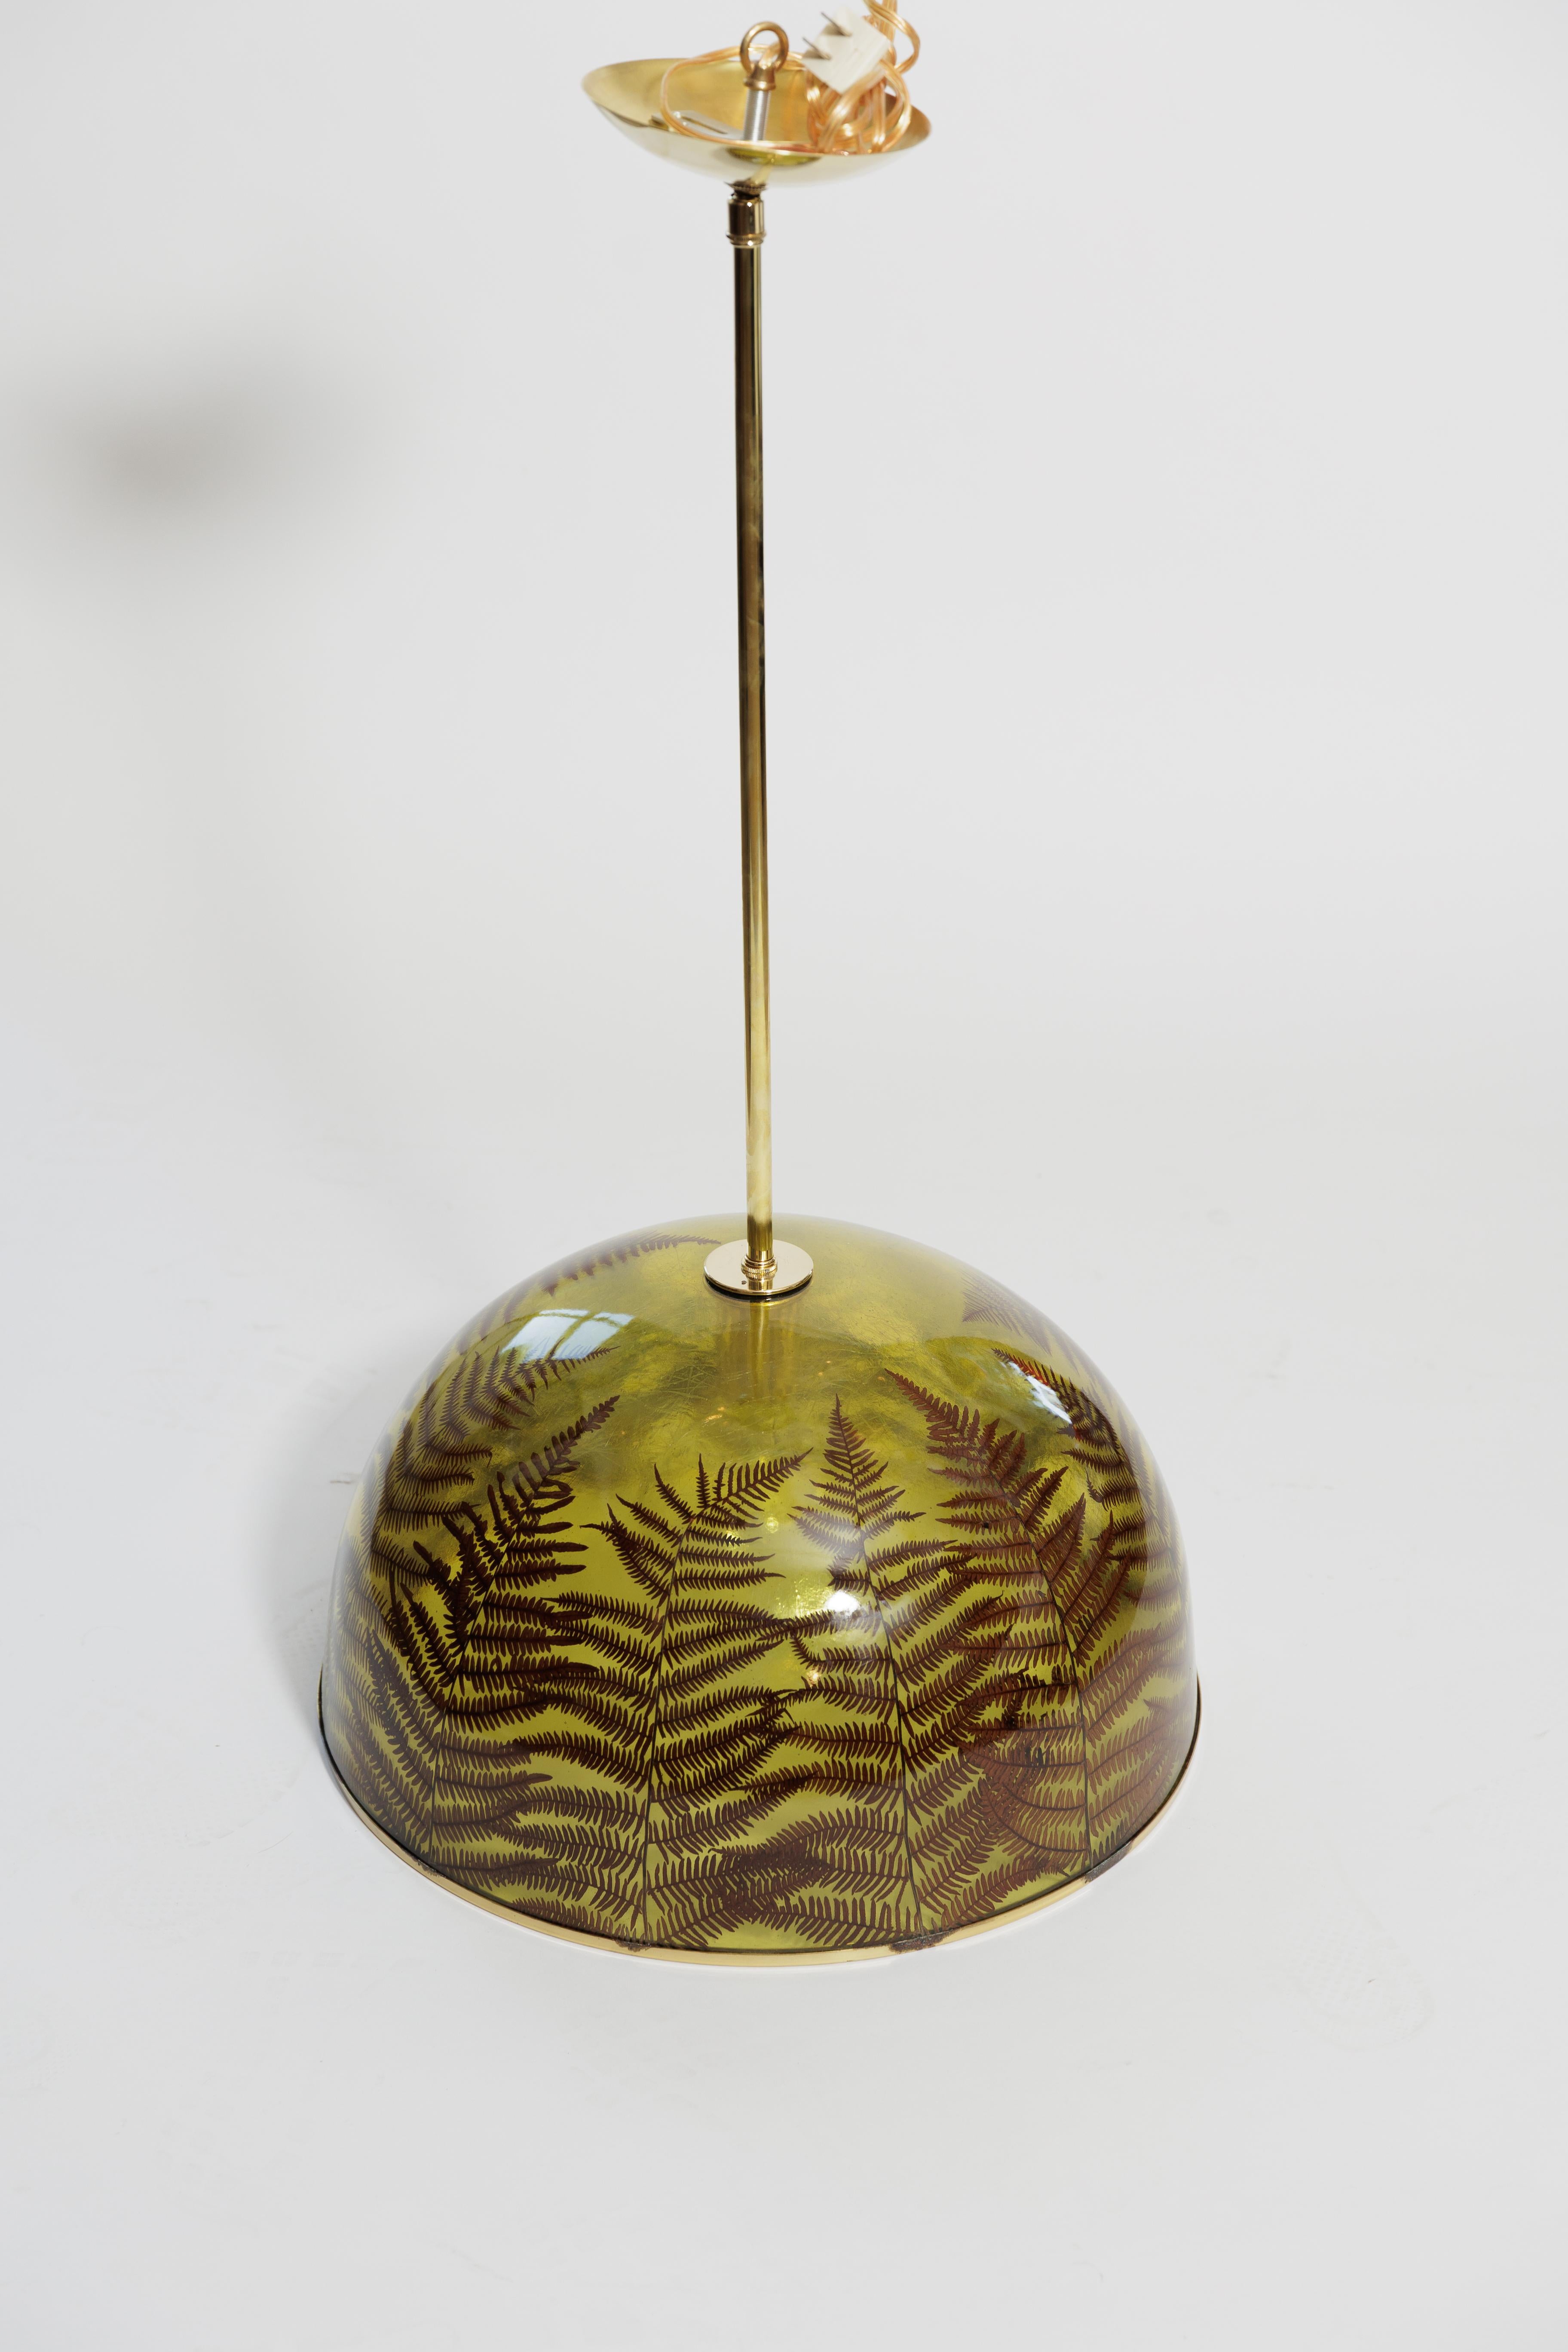 Unusual resing pendant encasing natural elements (ferns) with brass details.
Two are available.